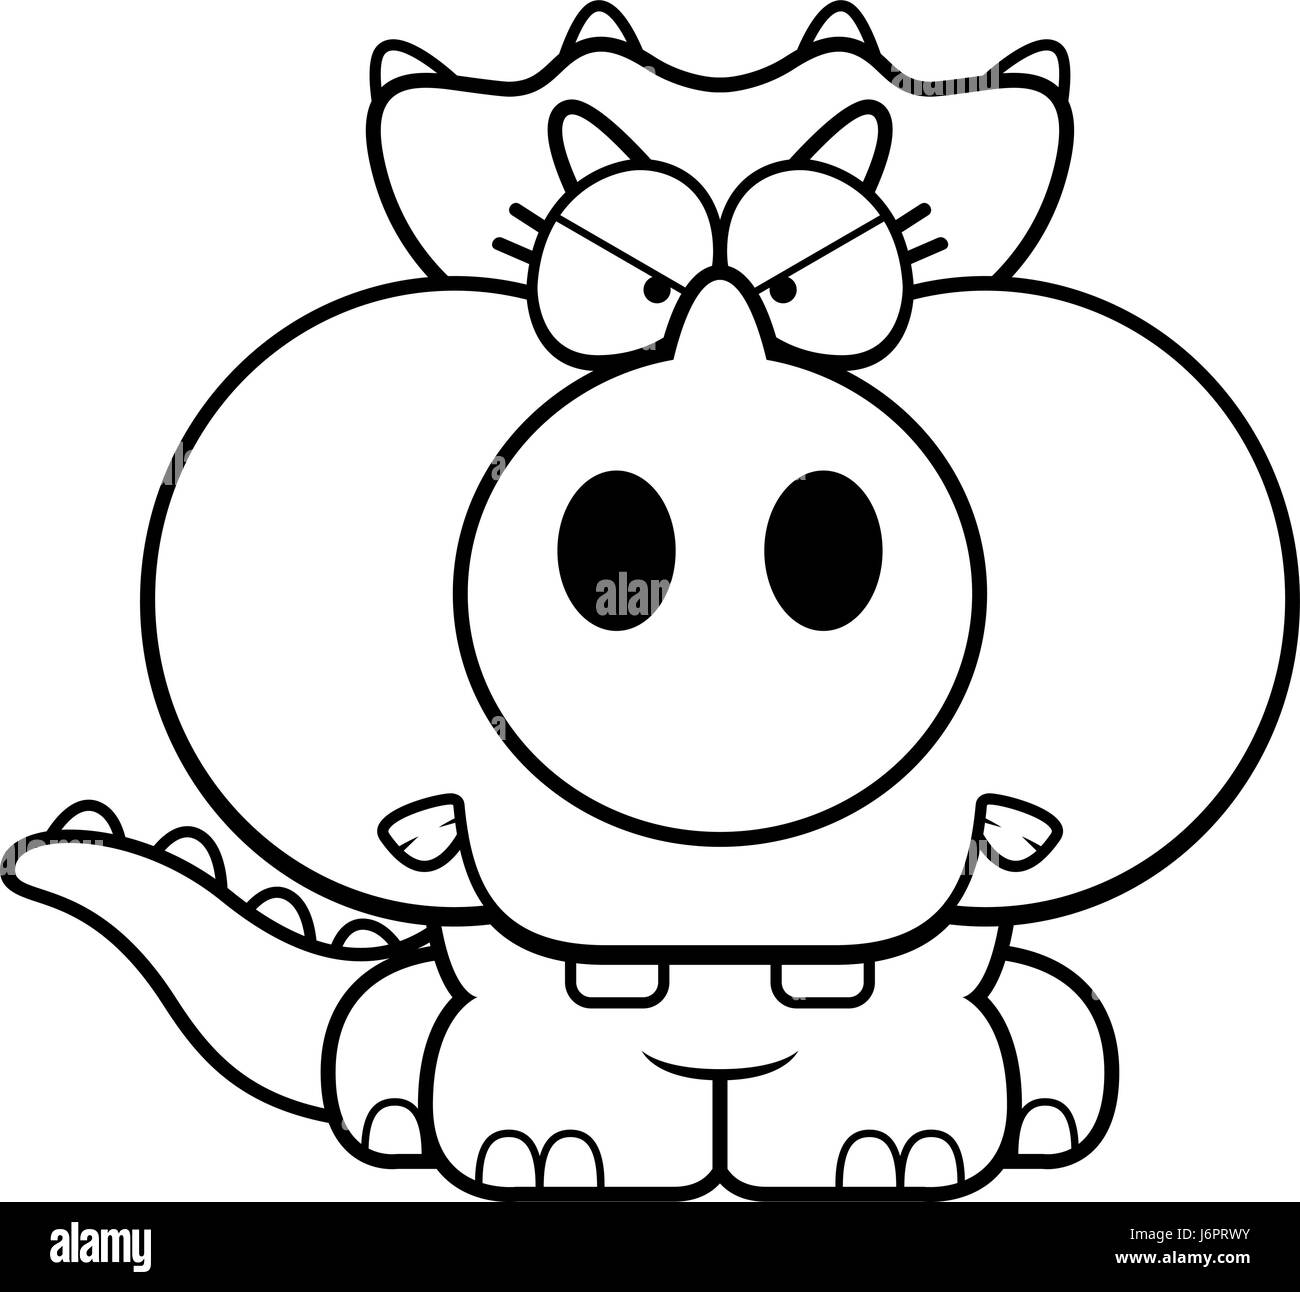 A cartoon illustration of a little Triceratops dinosaur with an angry expression. Stock Vector